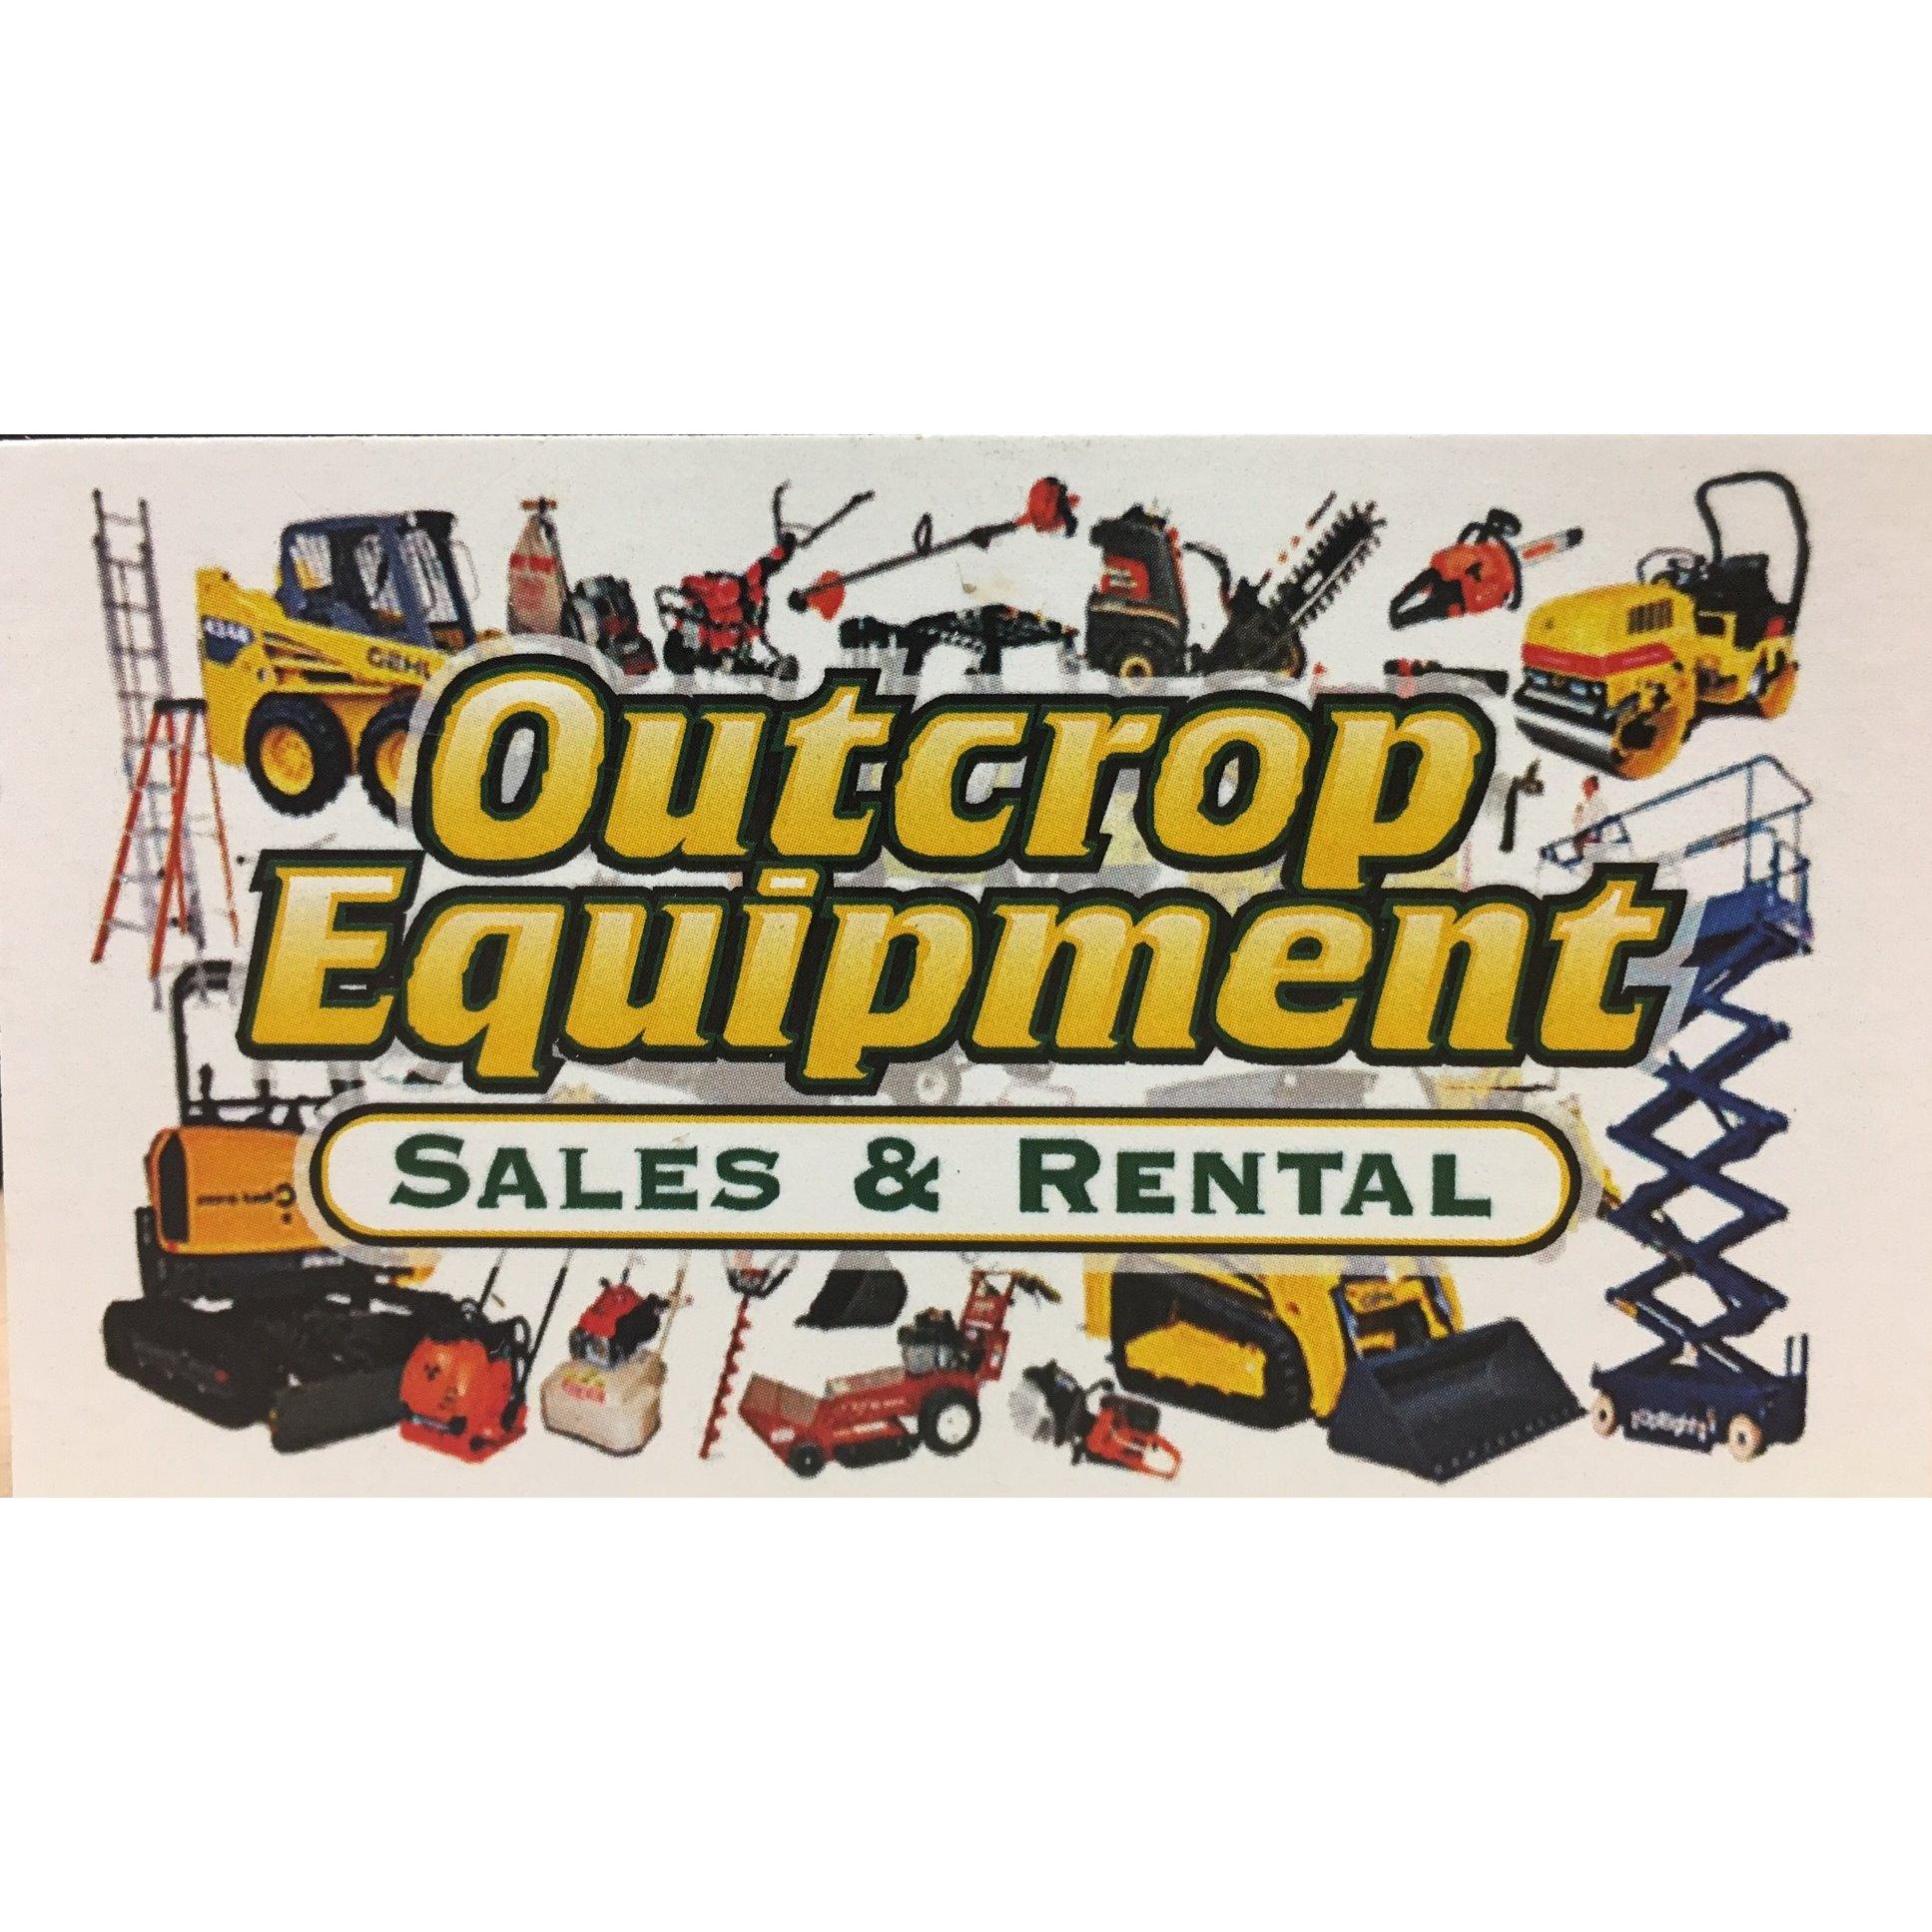 outcrop equipment sales & rental co. Coupons near me in ...